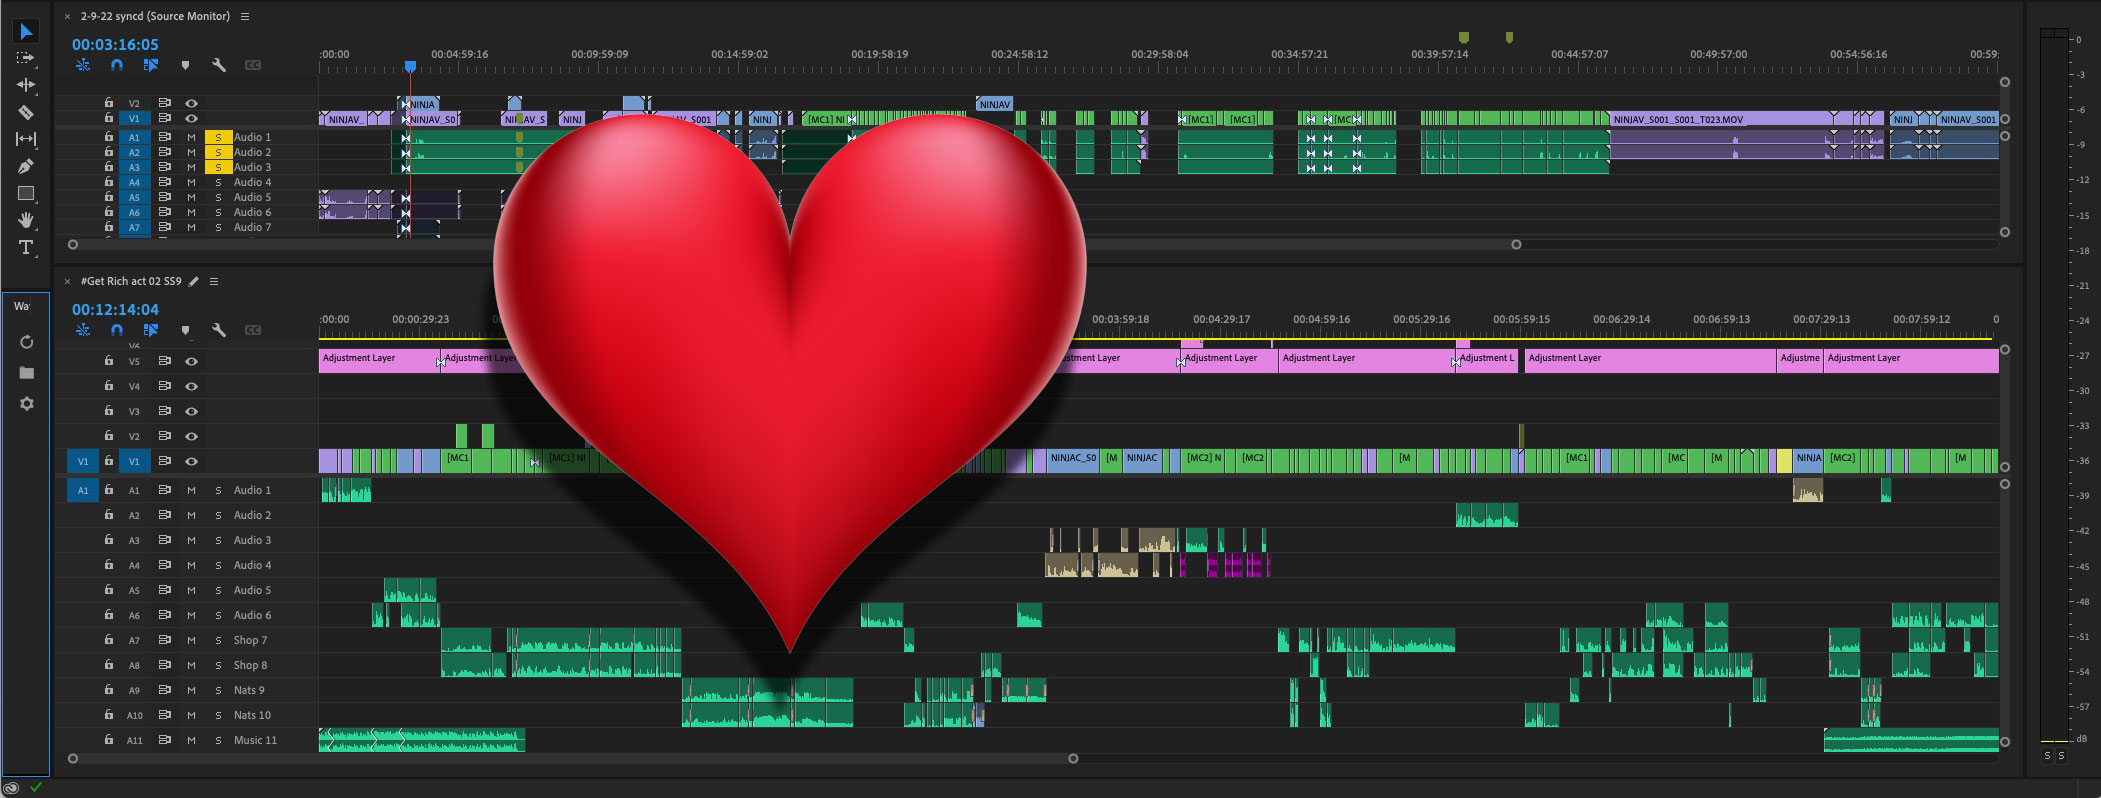 My single most loved feature in Adobe Premiere Pro 8